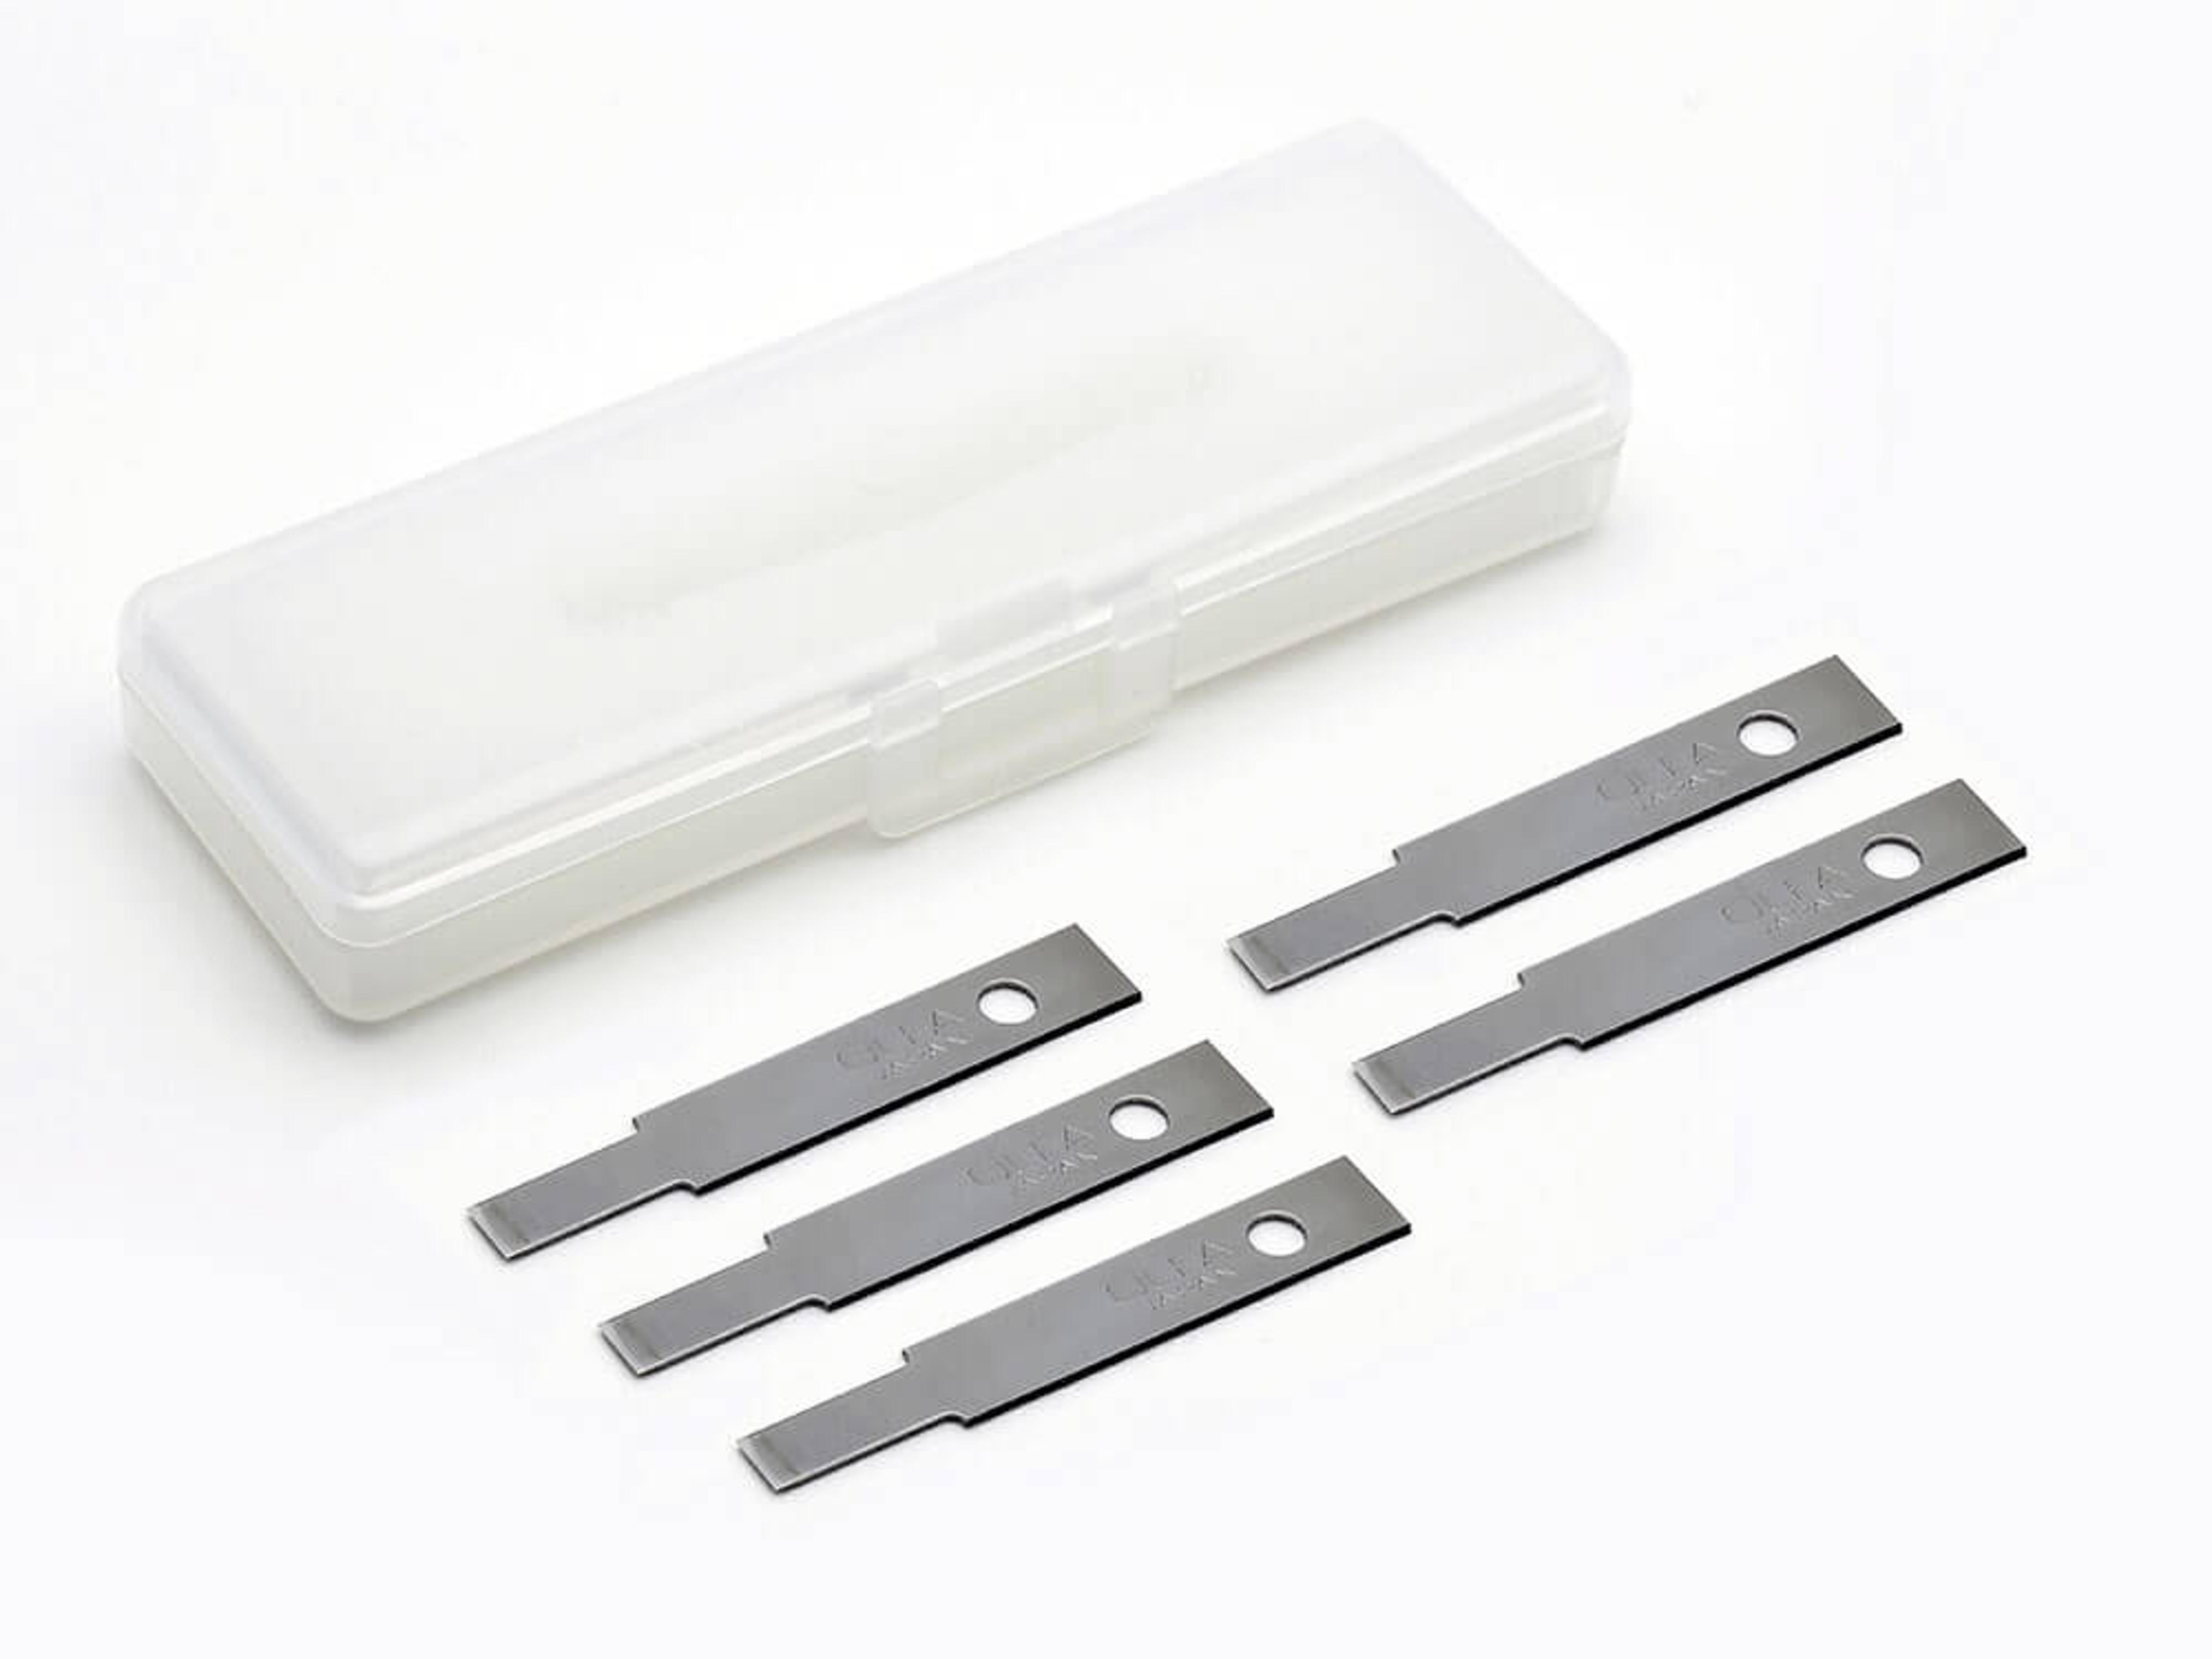 Tamiya Modelers Knife Pro Replacement Blades - Narrow Chisel